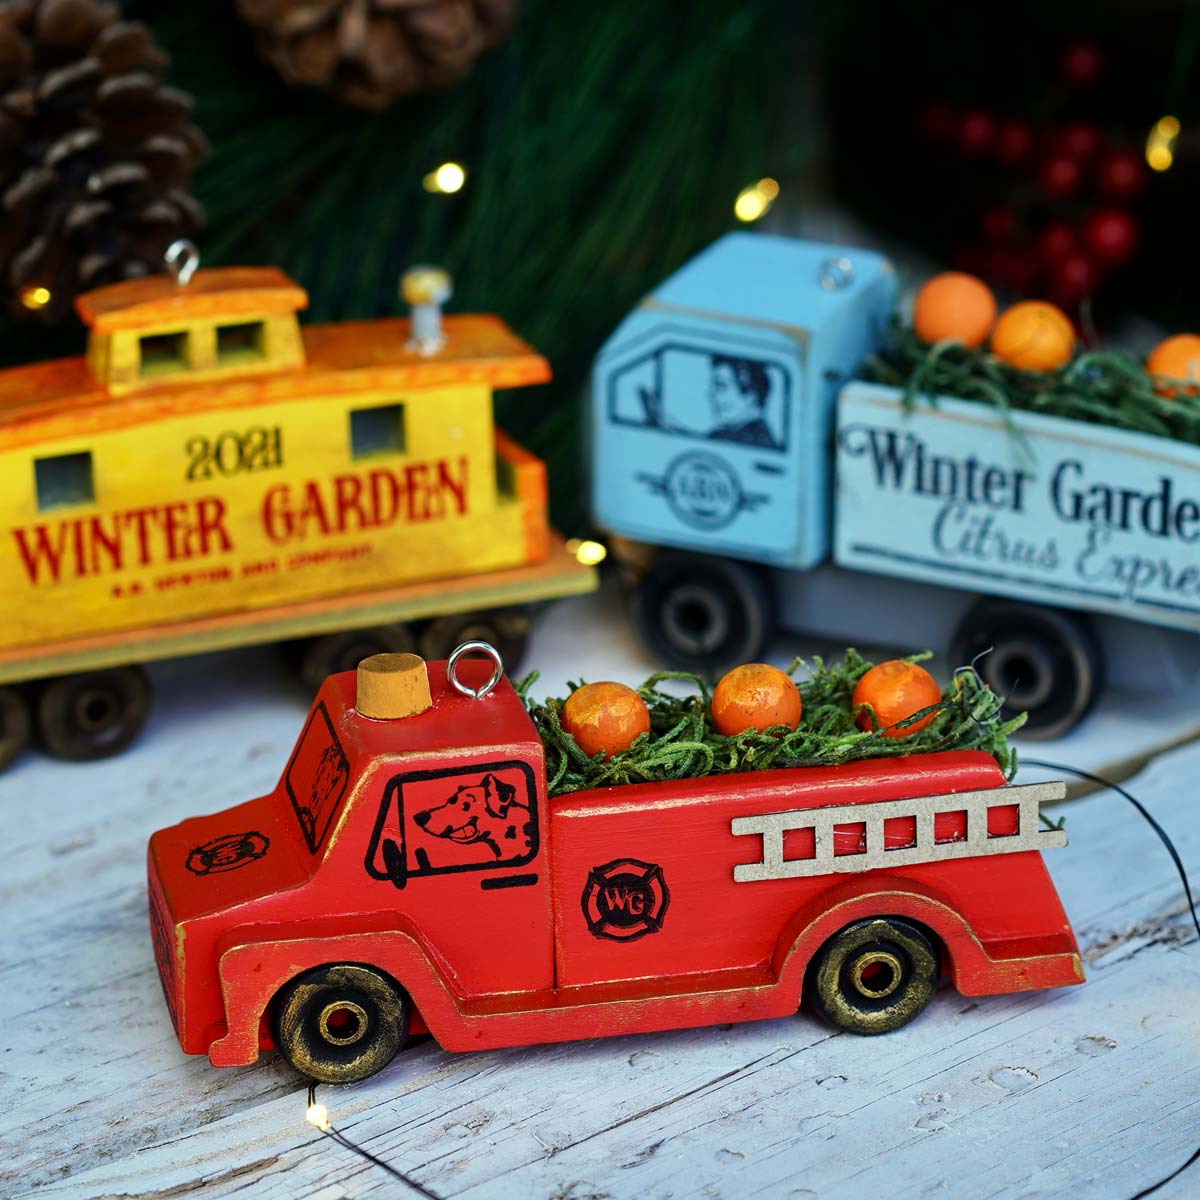 Winter Garden Classic Red Fire Engine Handmade Ornament | Limited Edition